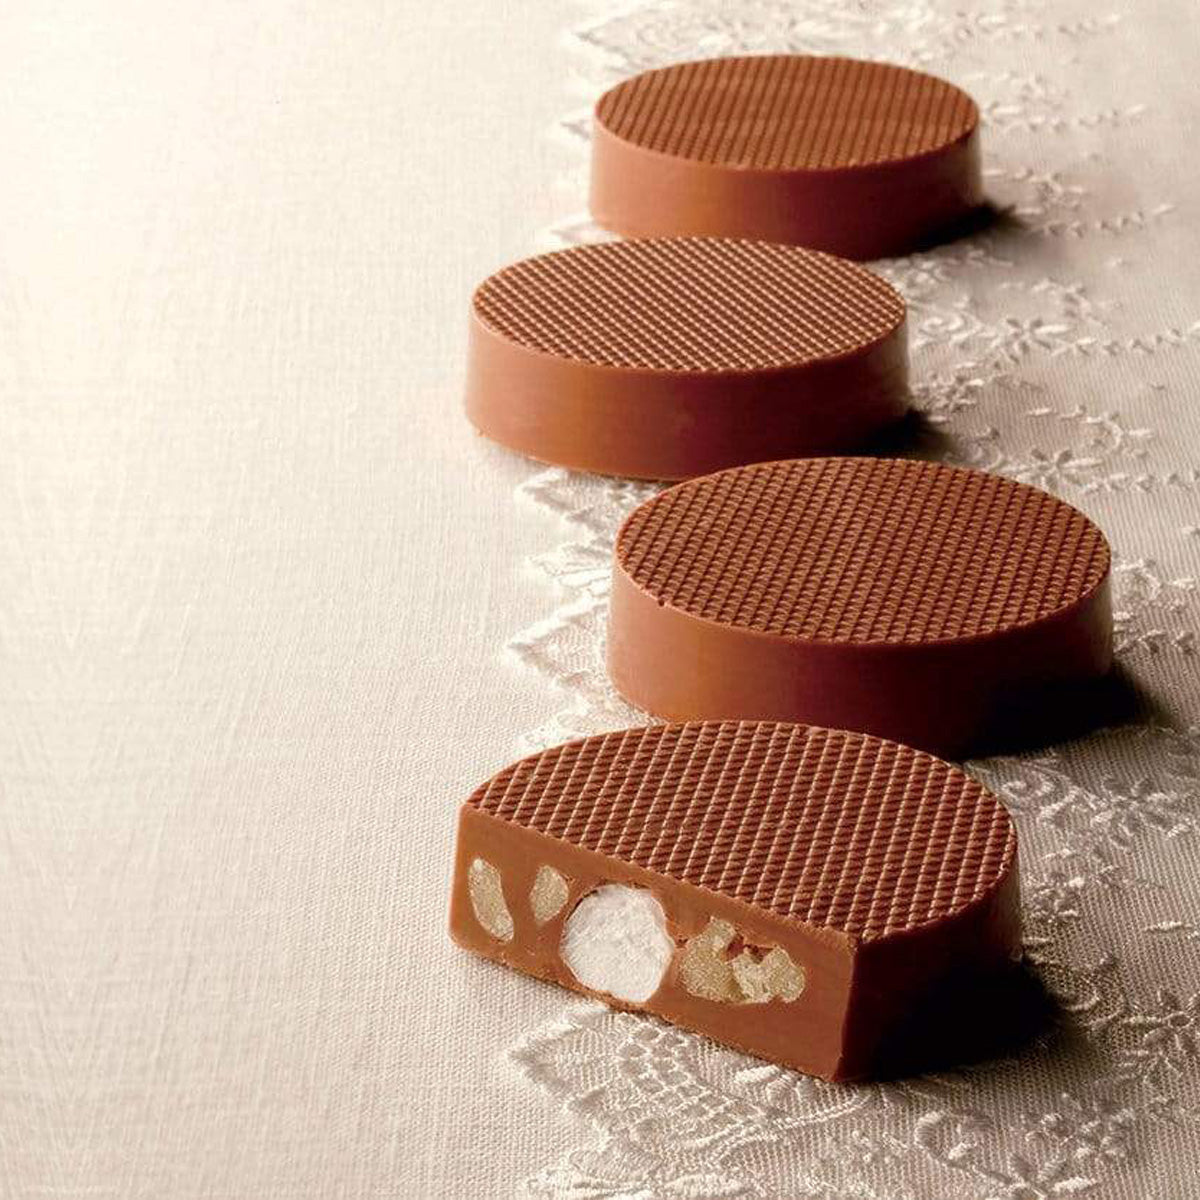 ROYCE' Chocolate - Petit Kurumaro Chocolat (5 Pcs) - Image shows brown chocolate discs filled with marshmallows and walnuts on a light brown surface with lace.